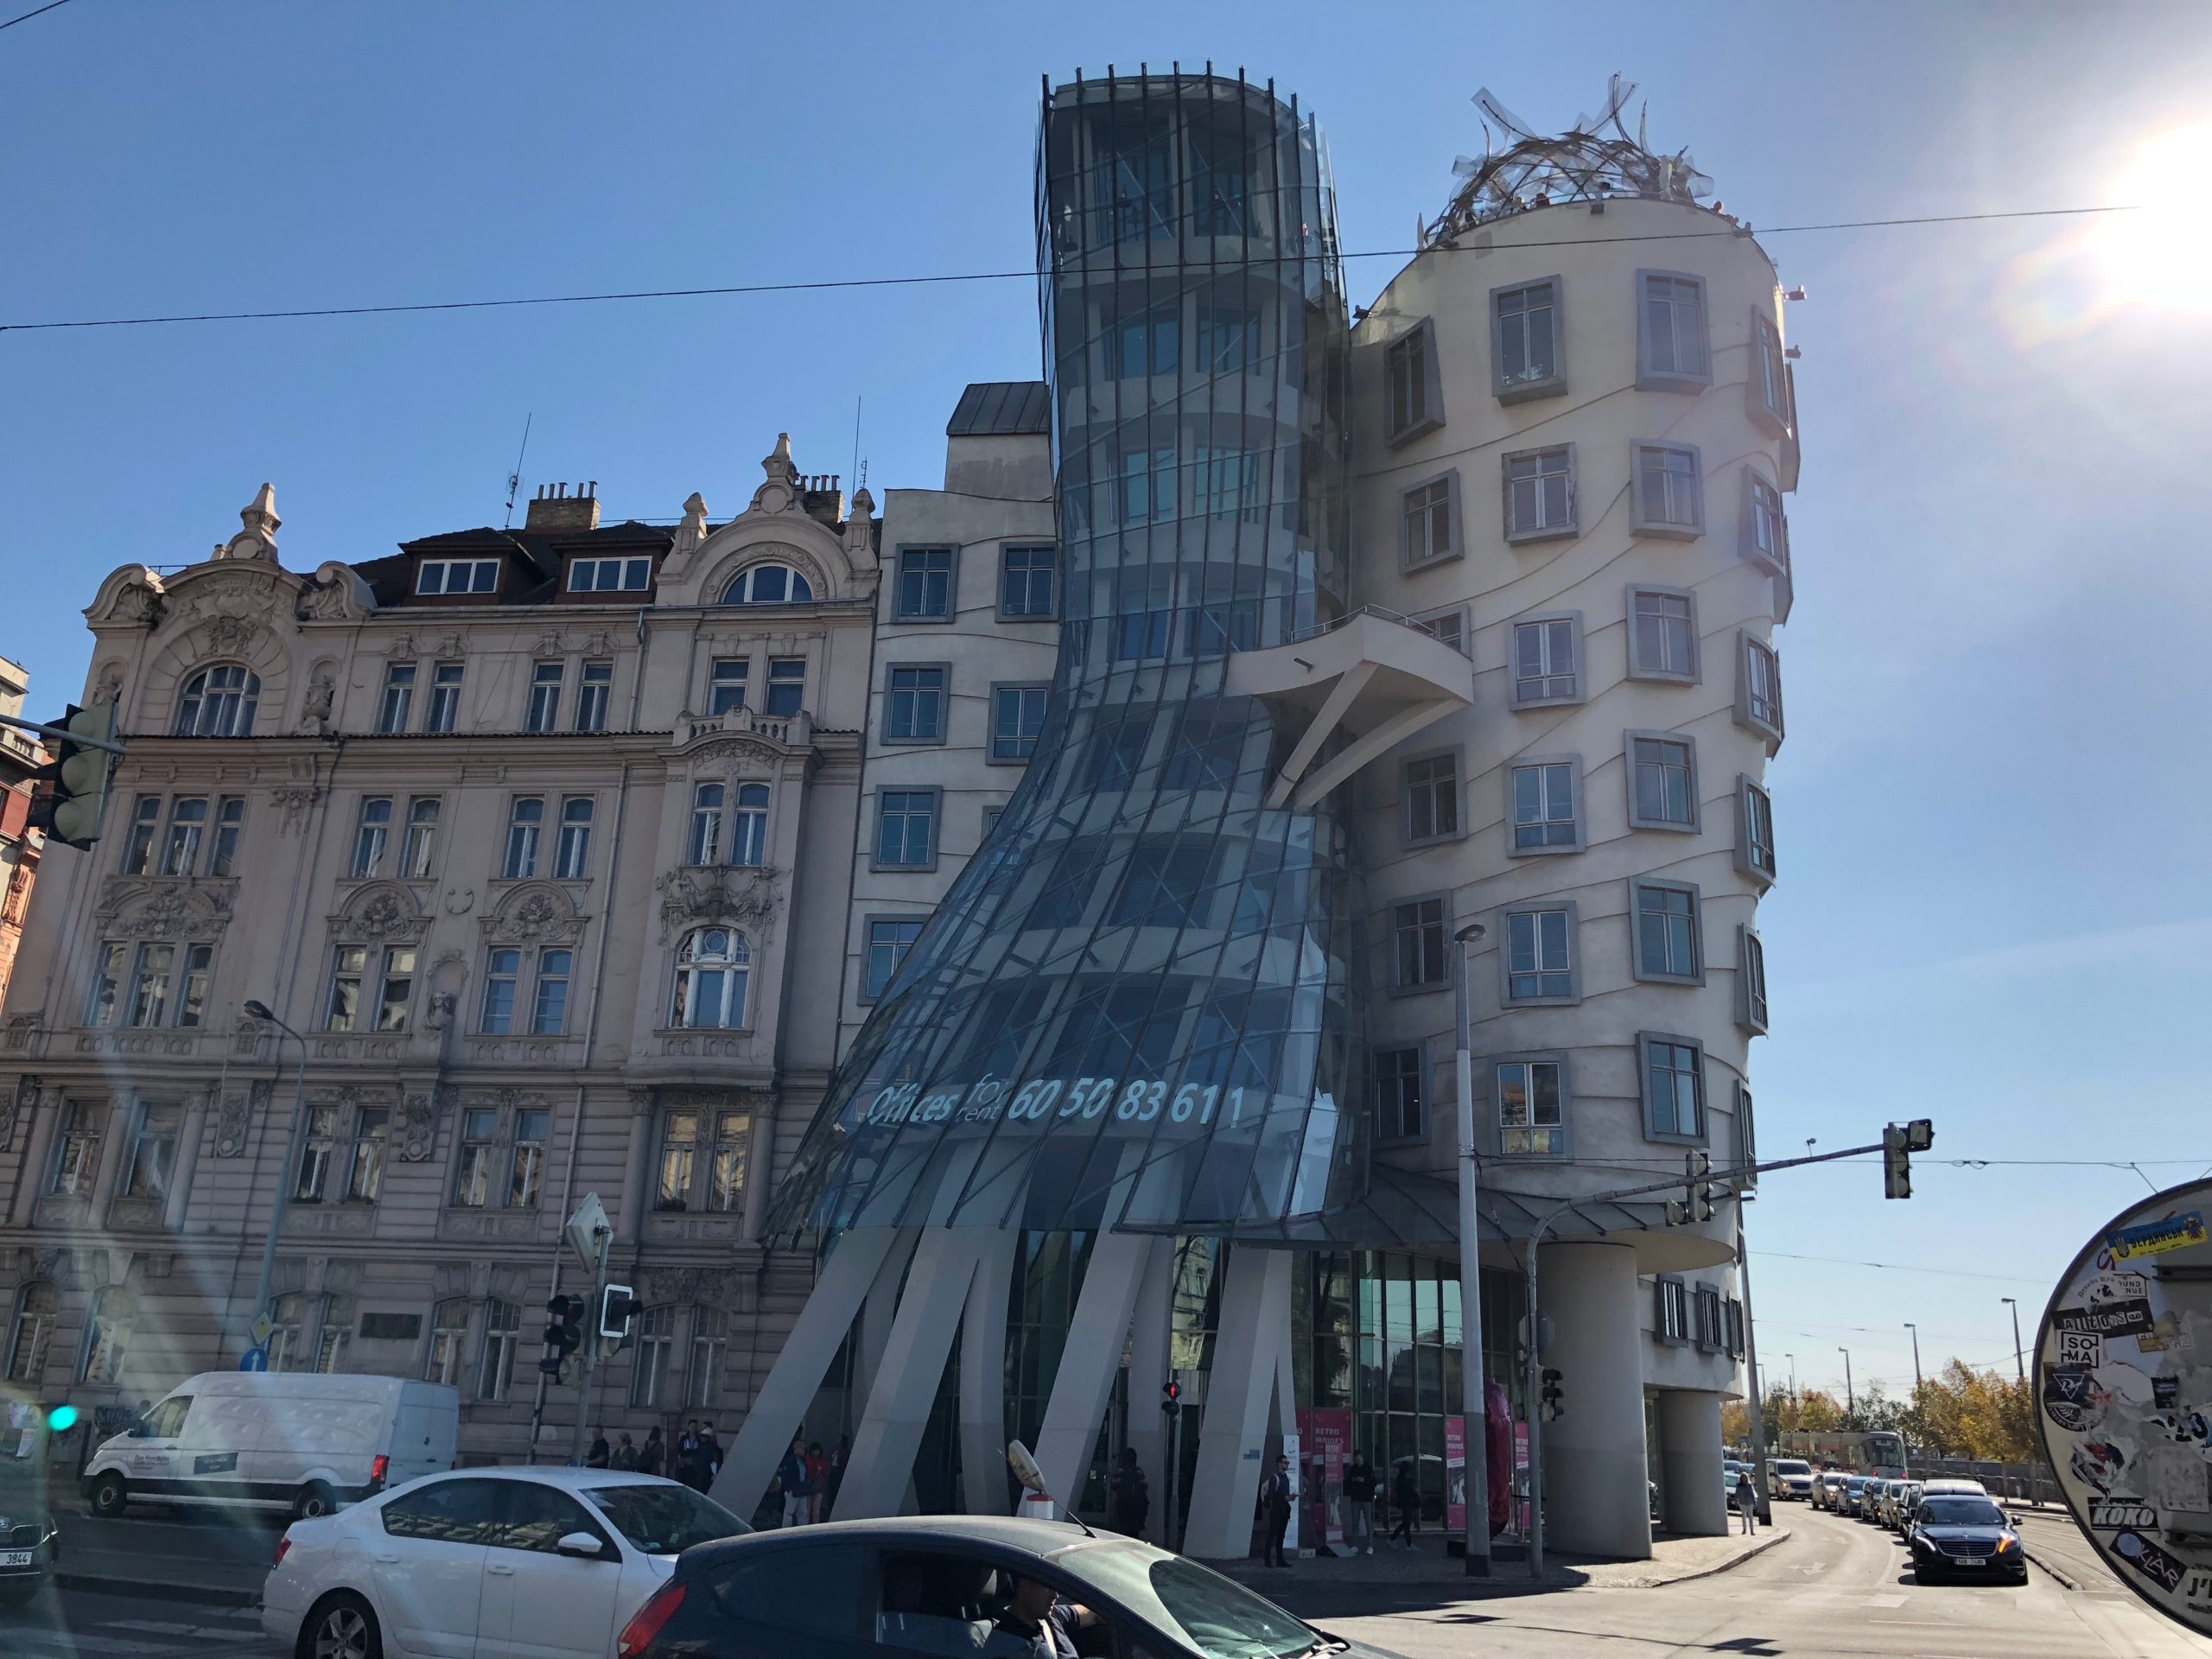 The Dancing House.